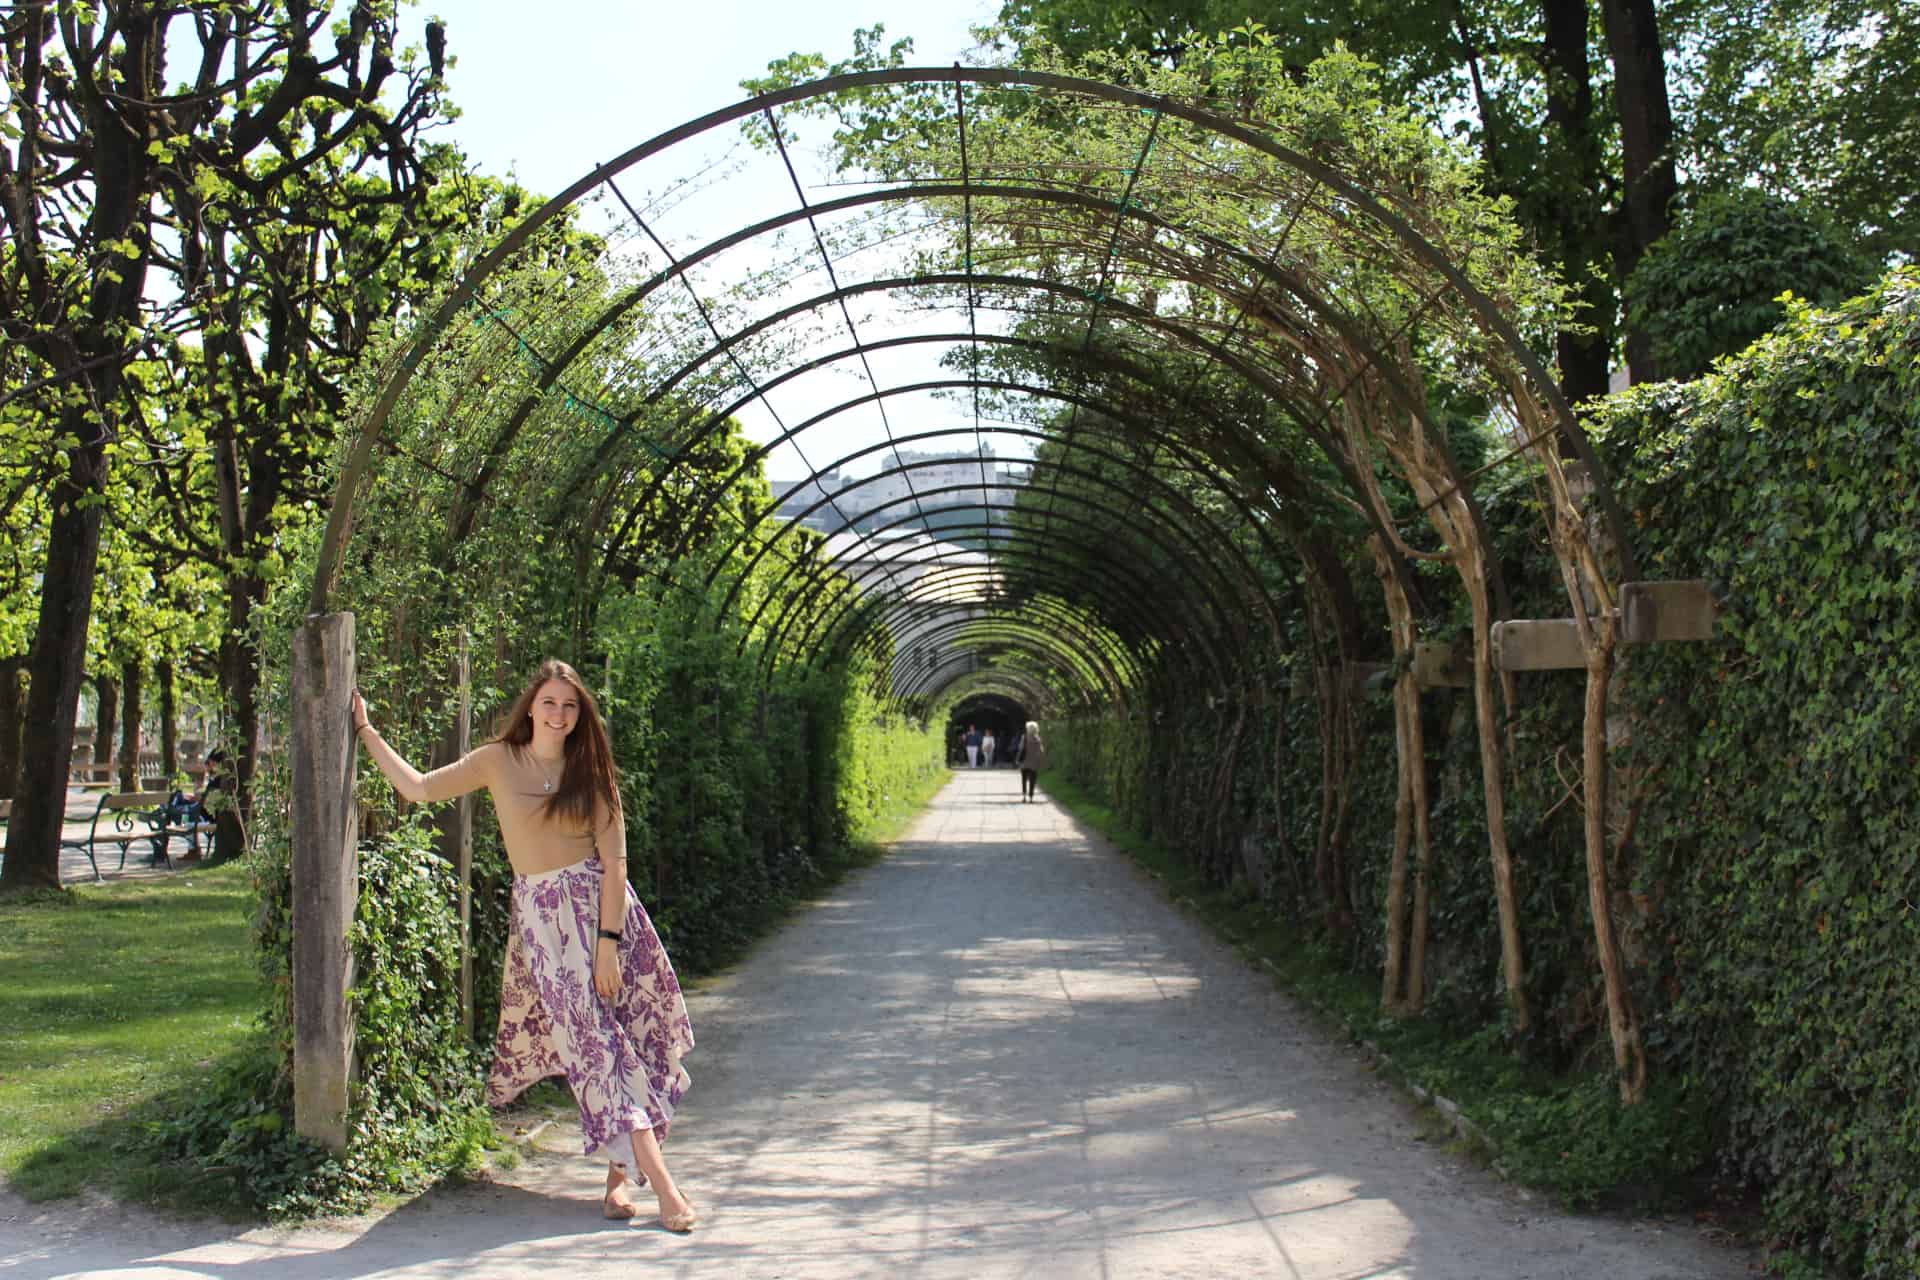 A girl standing in front of an arch in a garden.